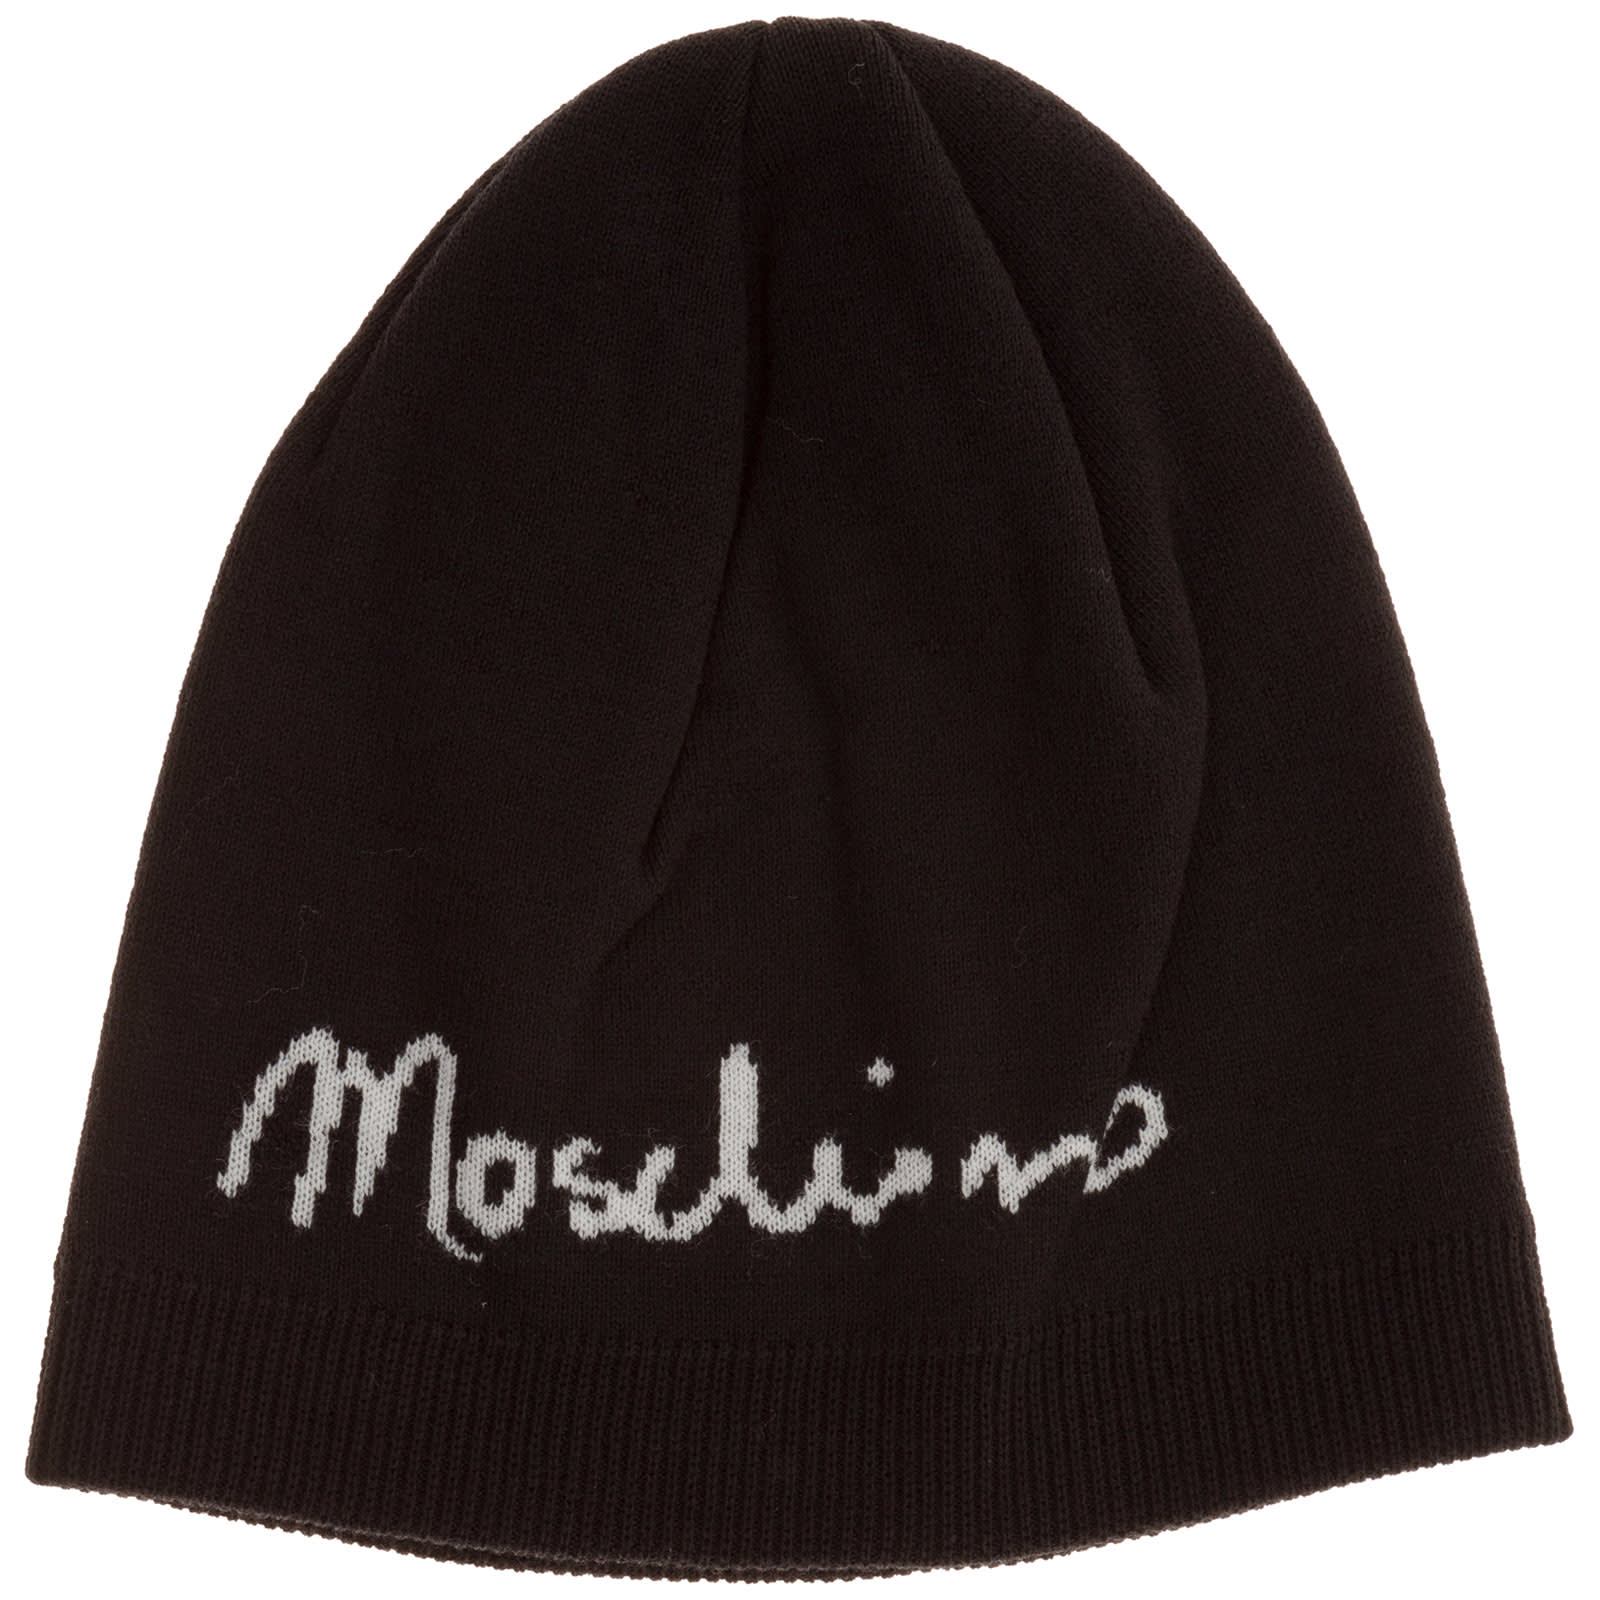 MOSCHINO DOUBLE QUESTION MARK BEANIE,M542160060001